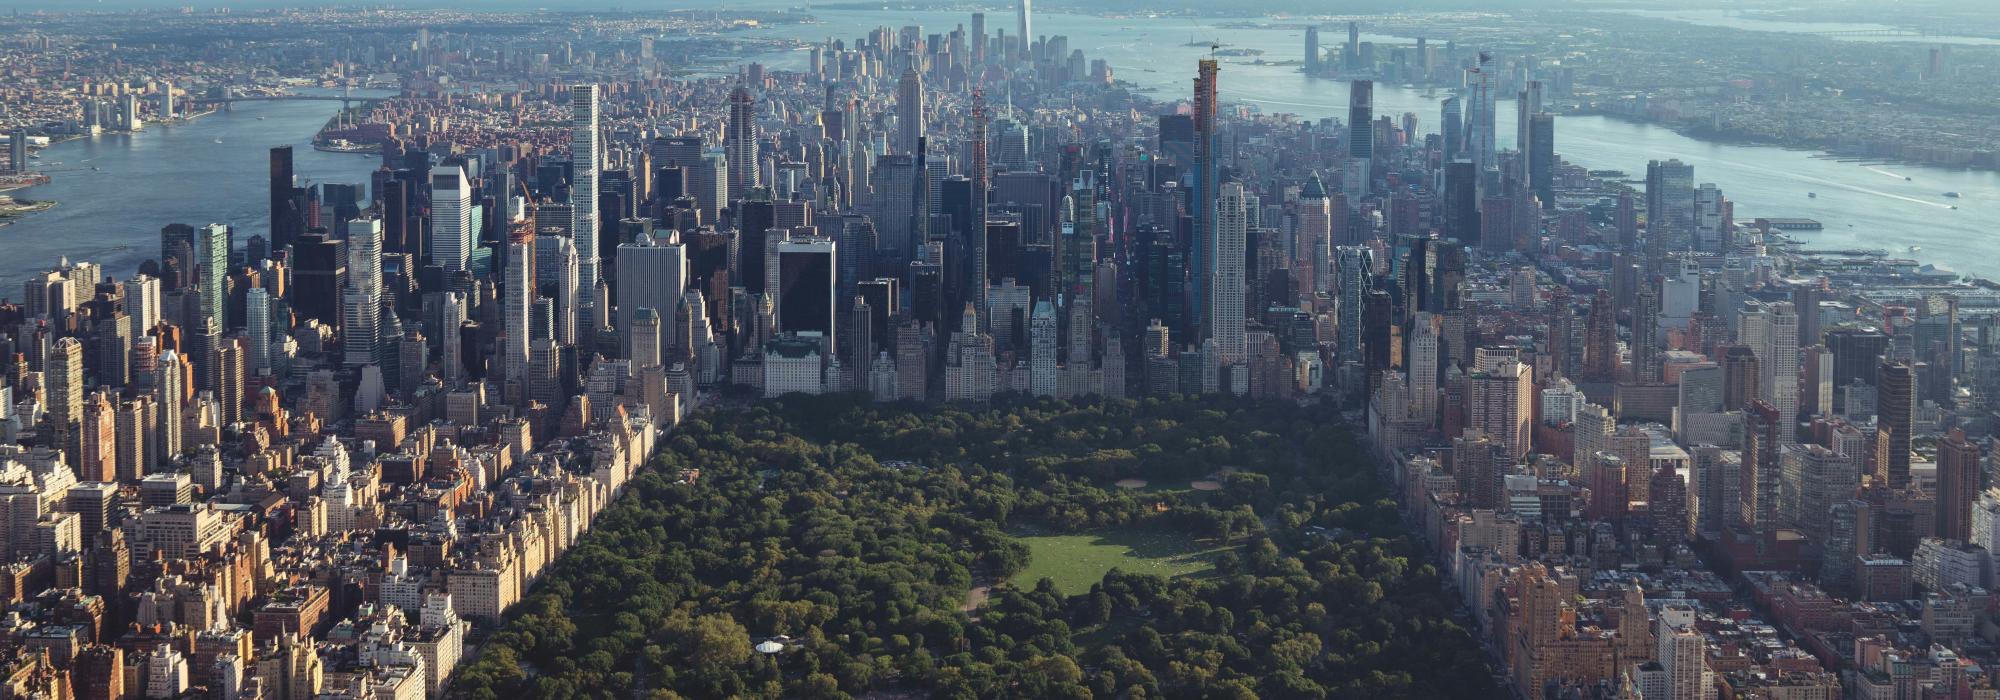 Manhattan skyscrapers and Central park